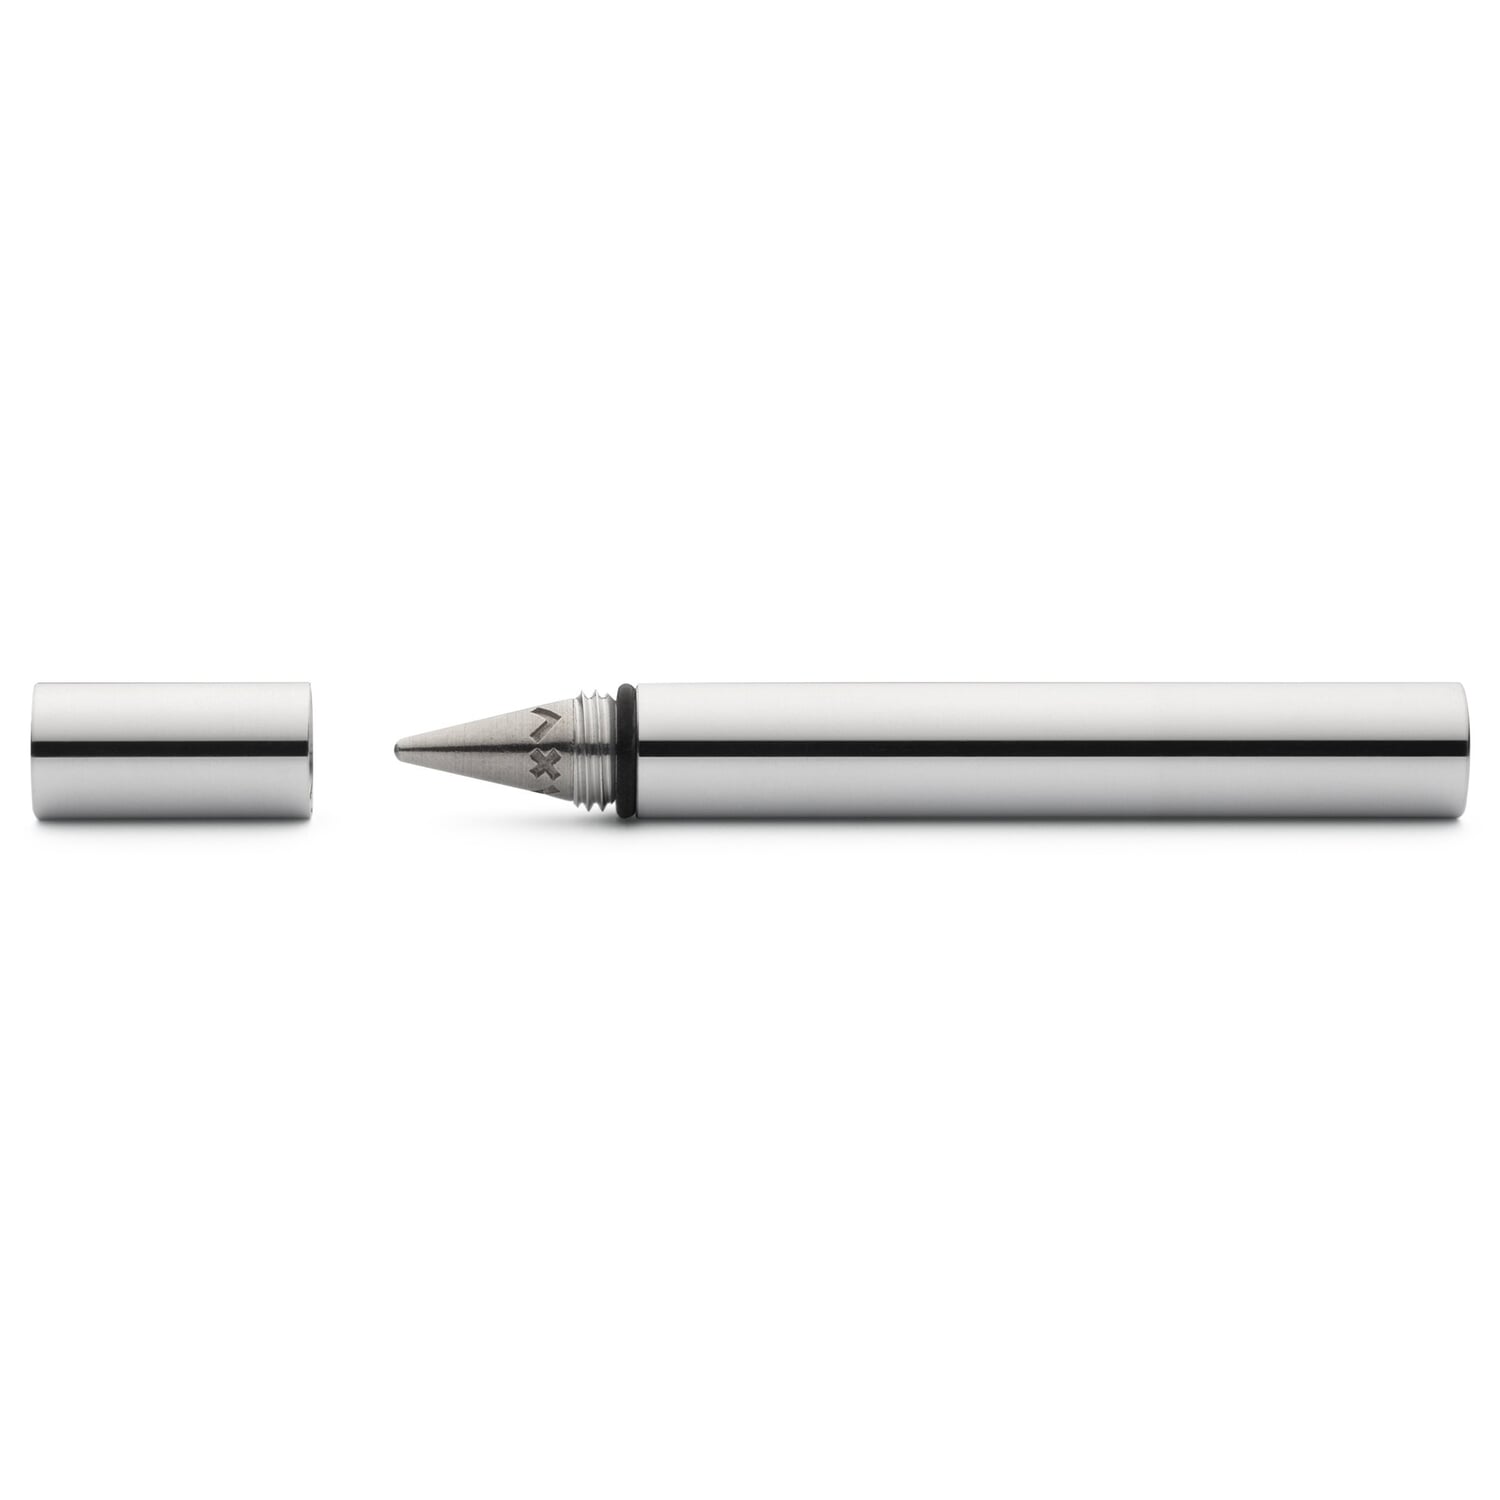 This tiny inkless pen is made from a special metal alloy that can